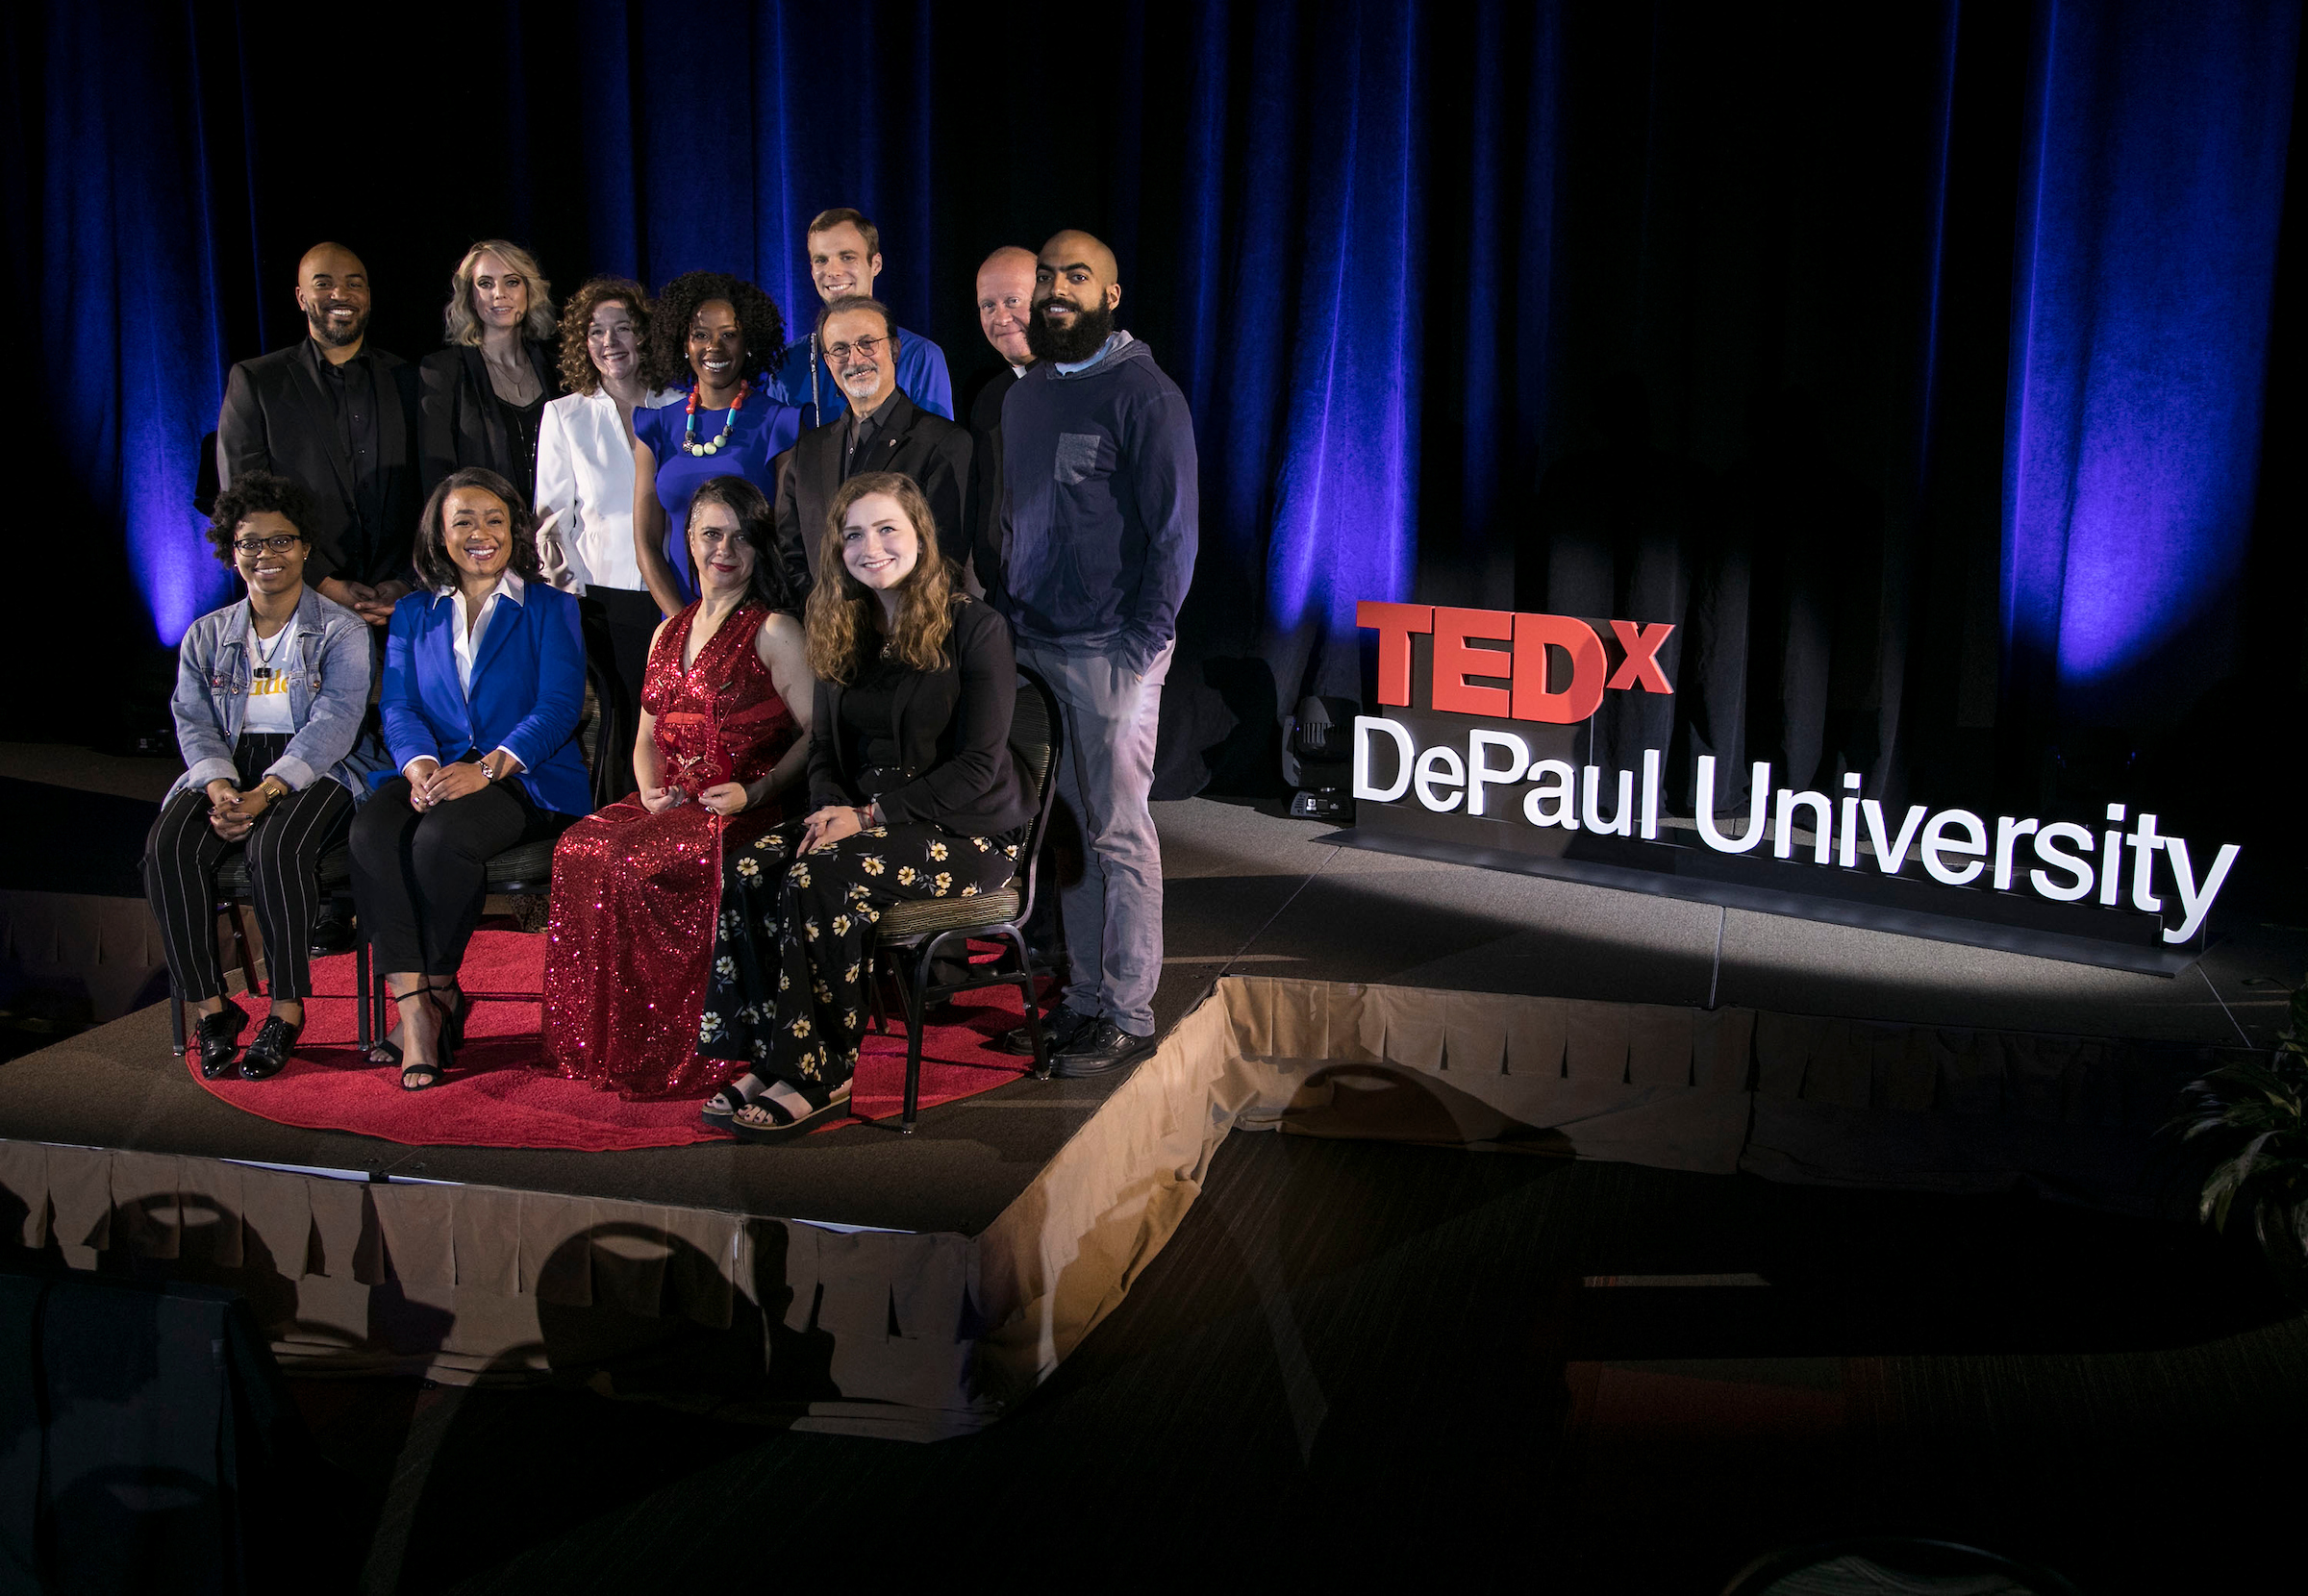 Presenters from the 2018 TEDxDePaulUniversity